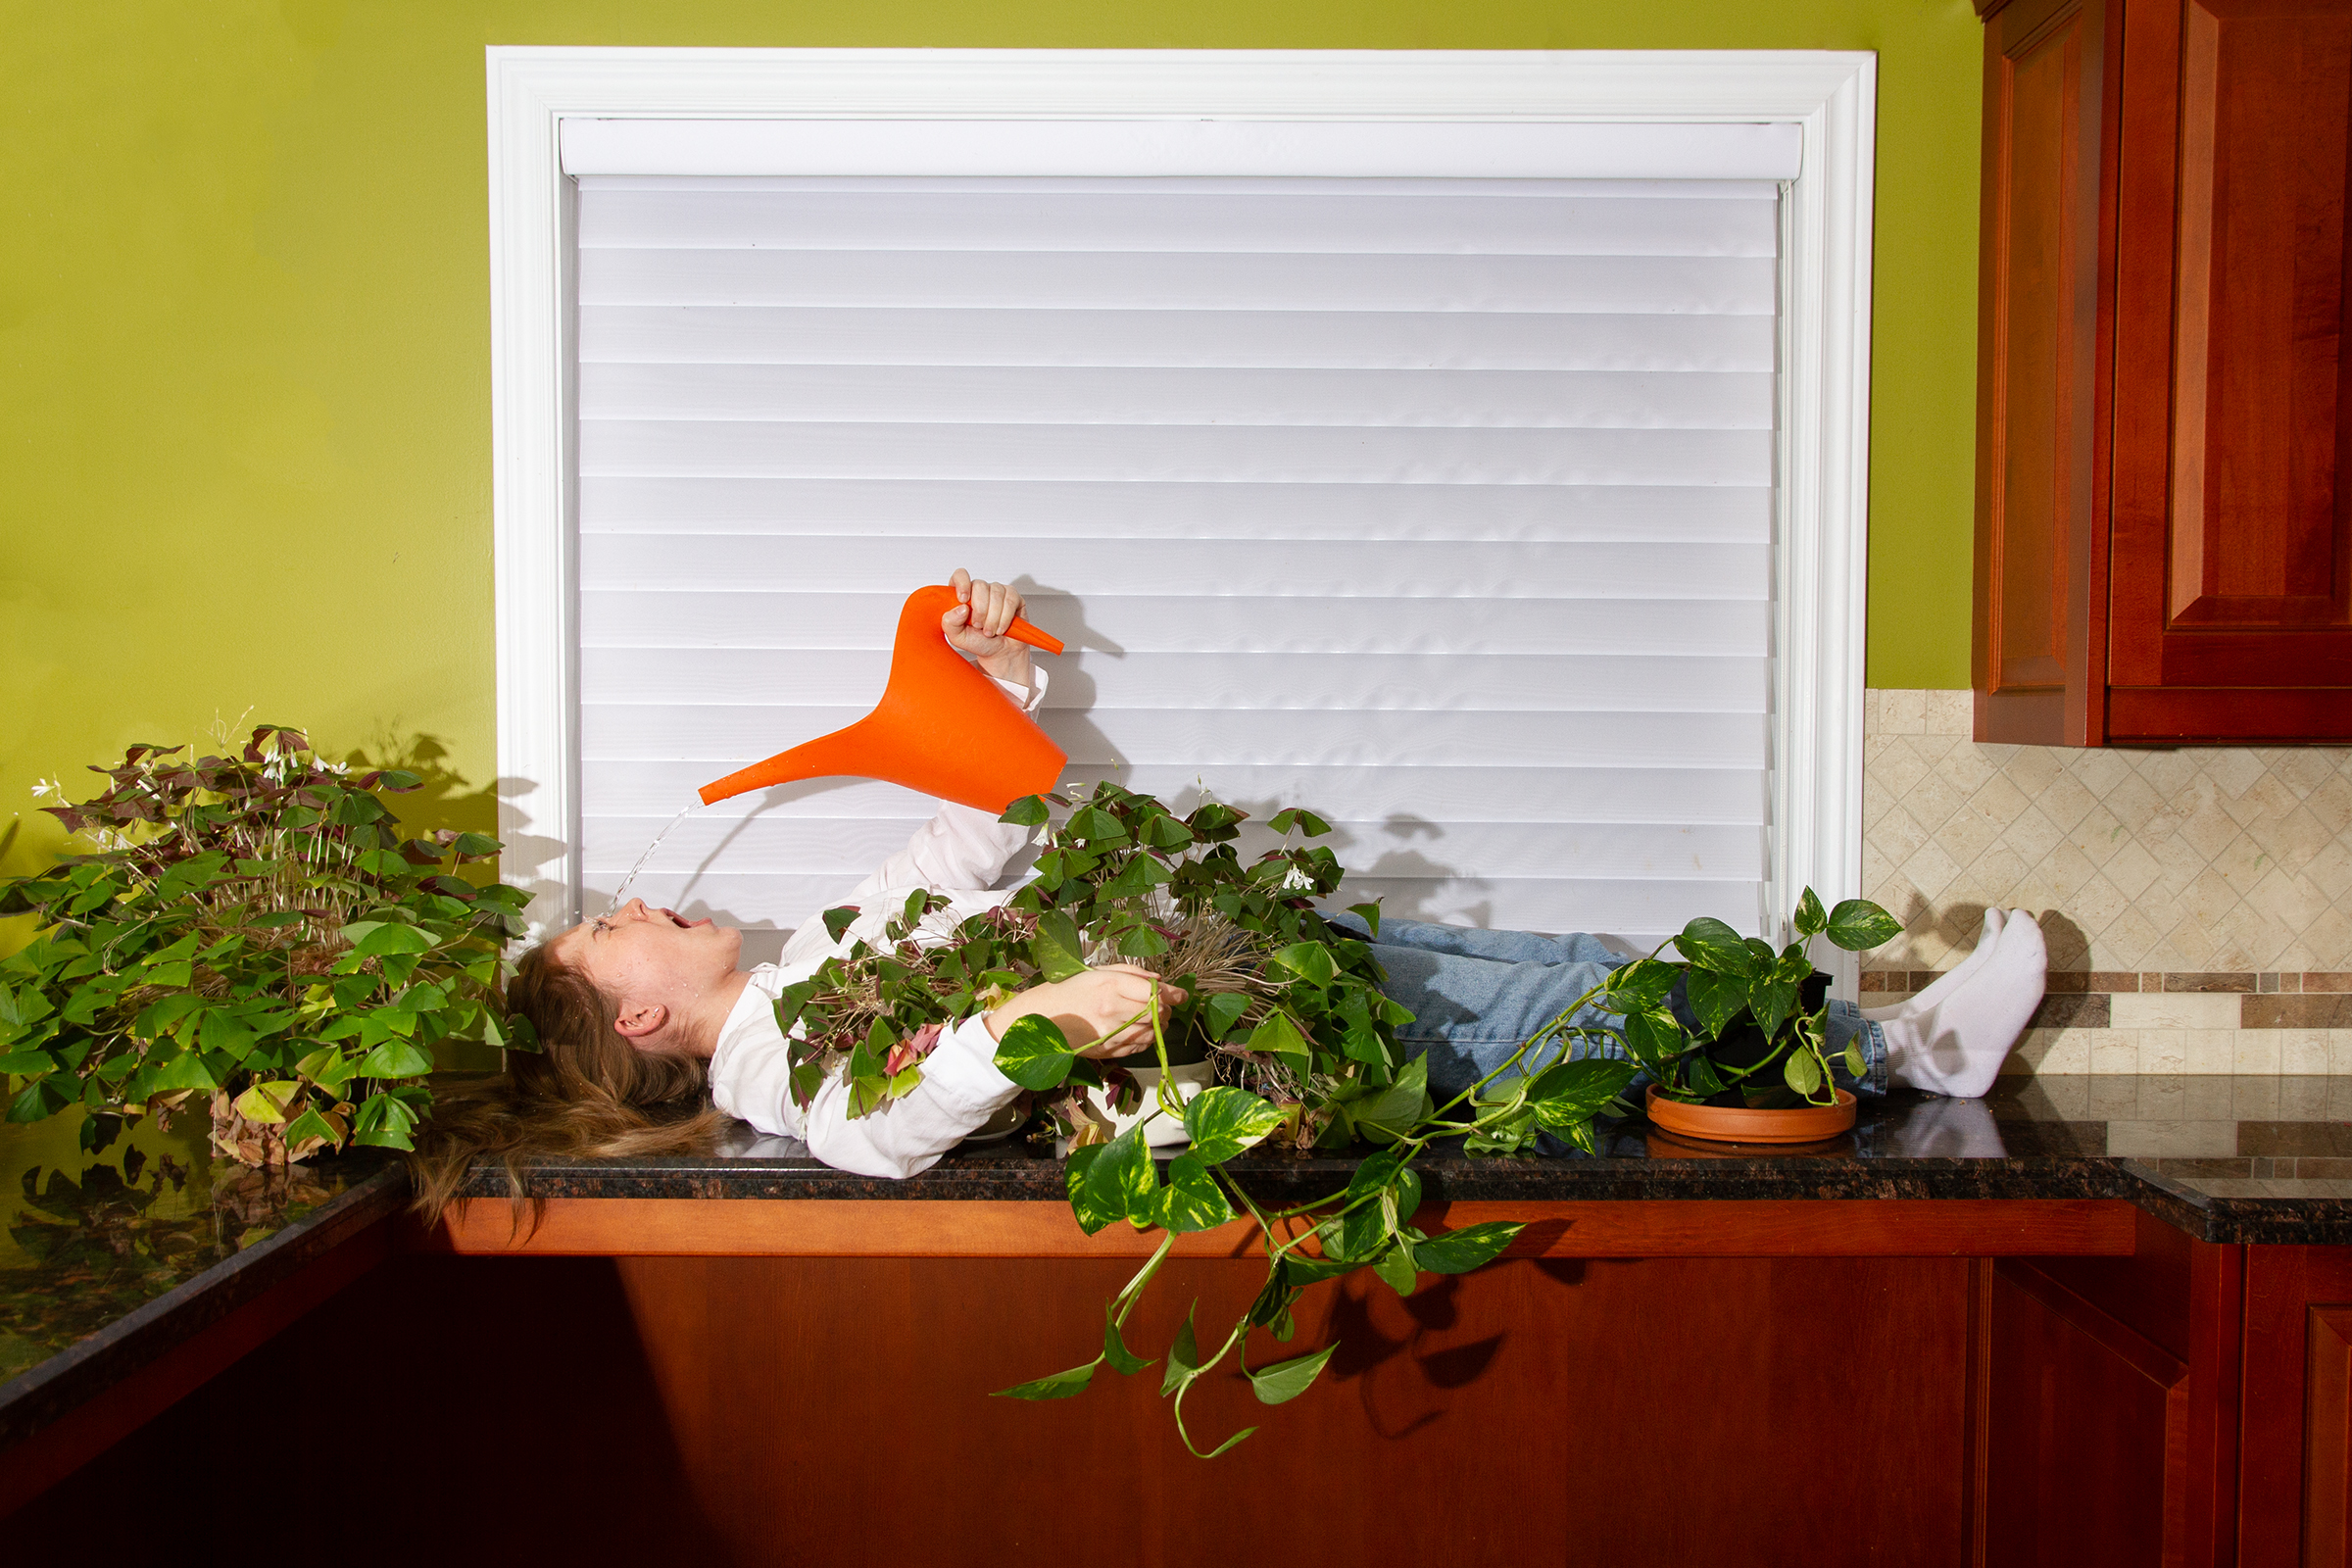 A person lies on a countertop behind an arrangement of plants. They are pouring water from a watering can onto their face. A shadow is cast upon the window curtains behind.